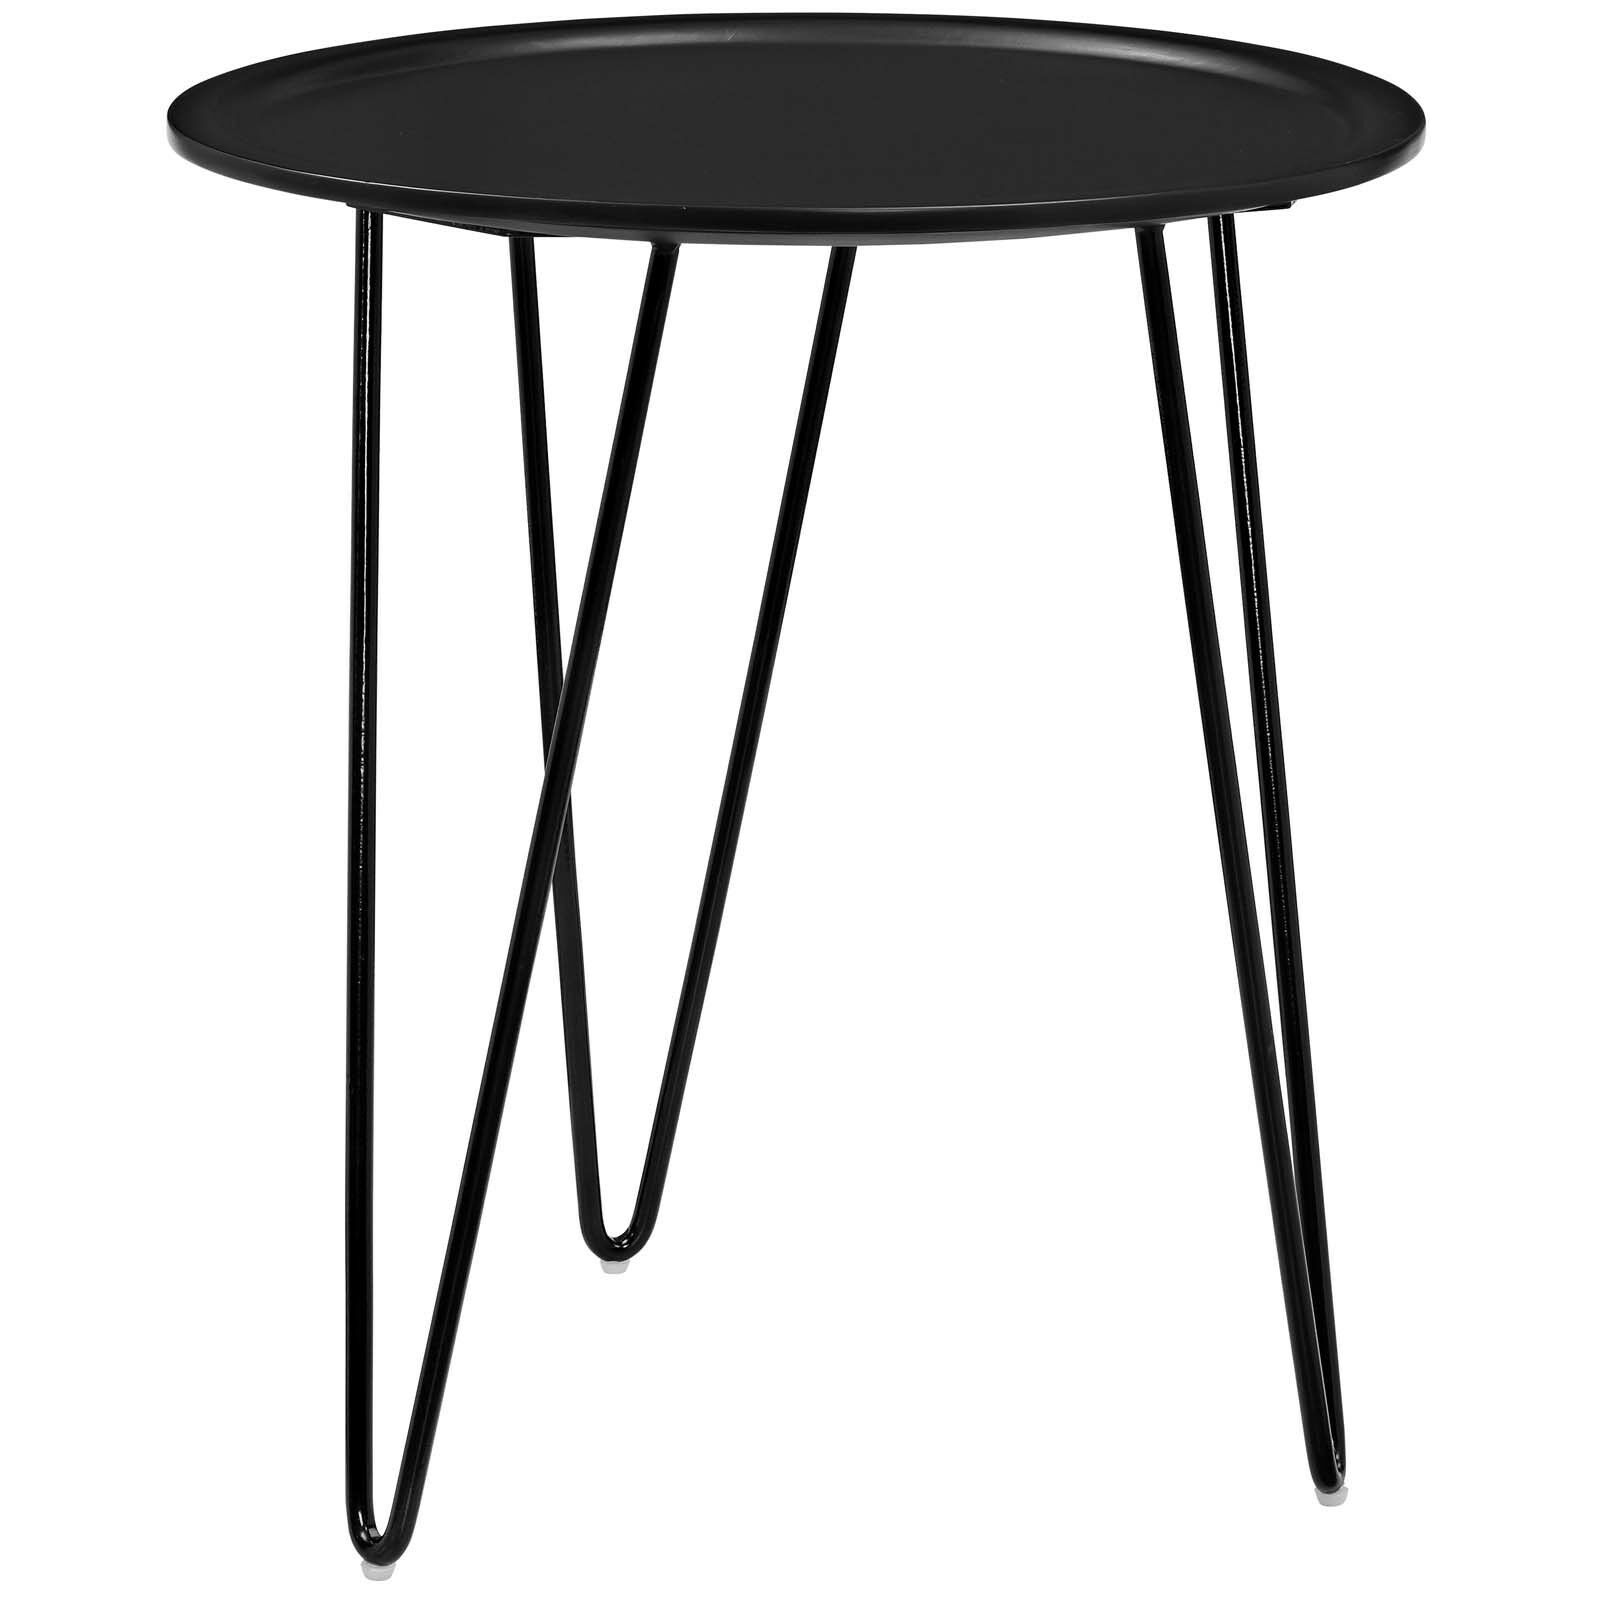 mid century modern hairpin metal leg round accent side table black glass dining room sets white patio light pink chair bedside chest sofa design aluminium outdoor furniture bar